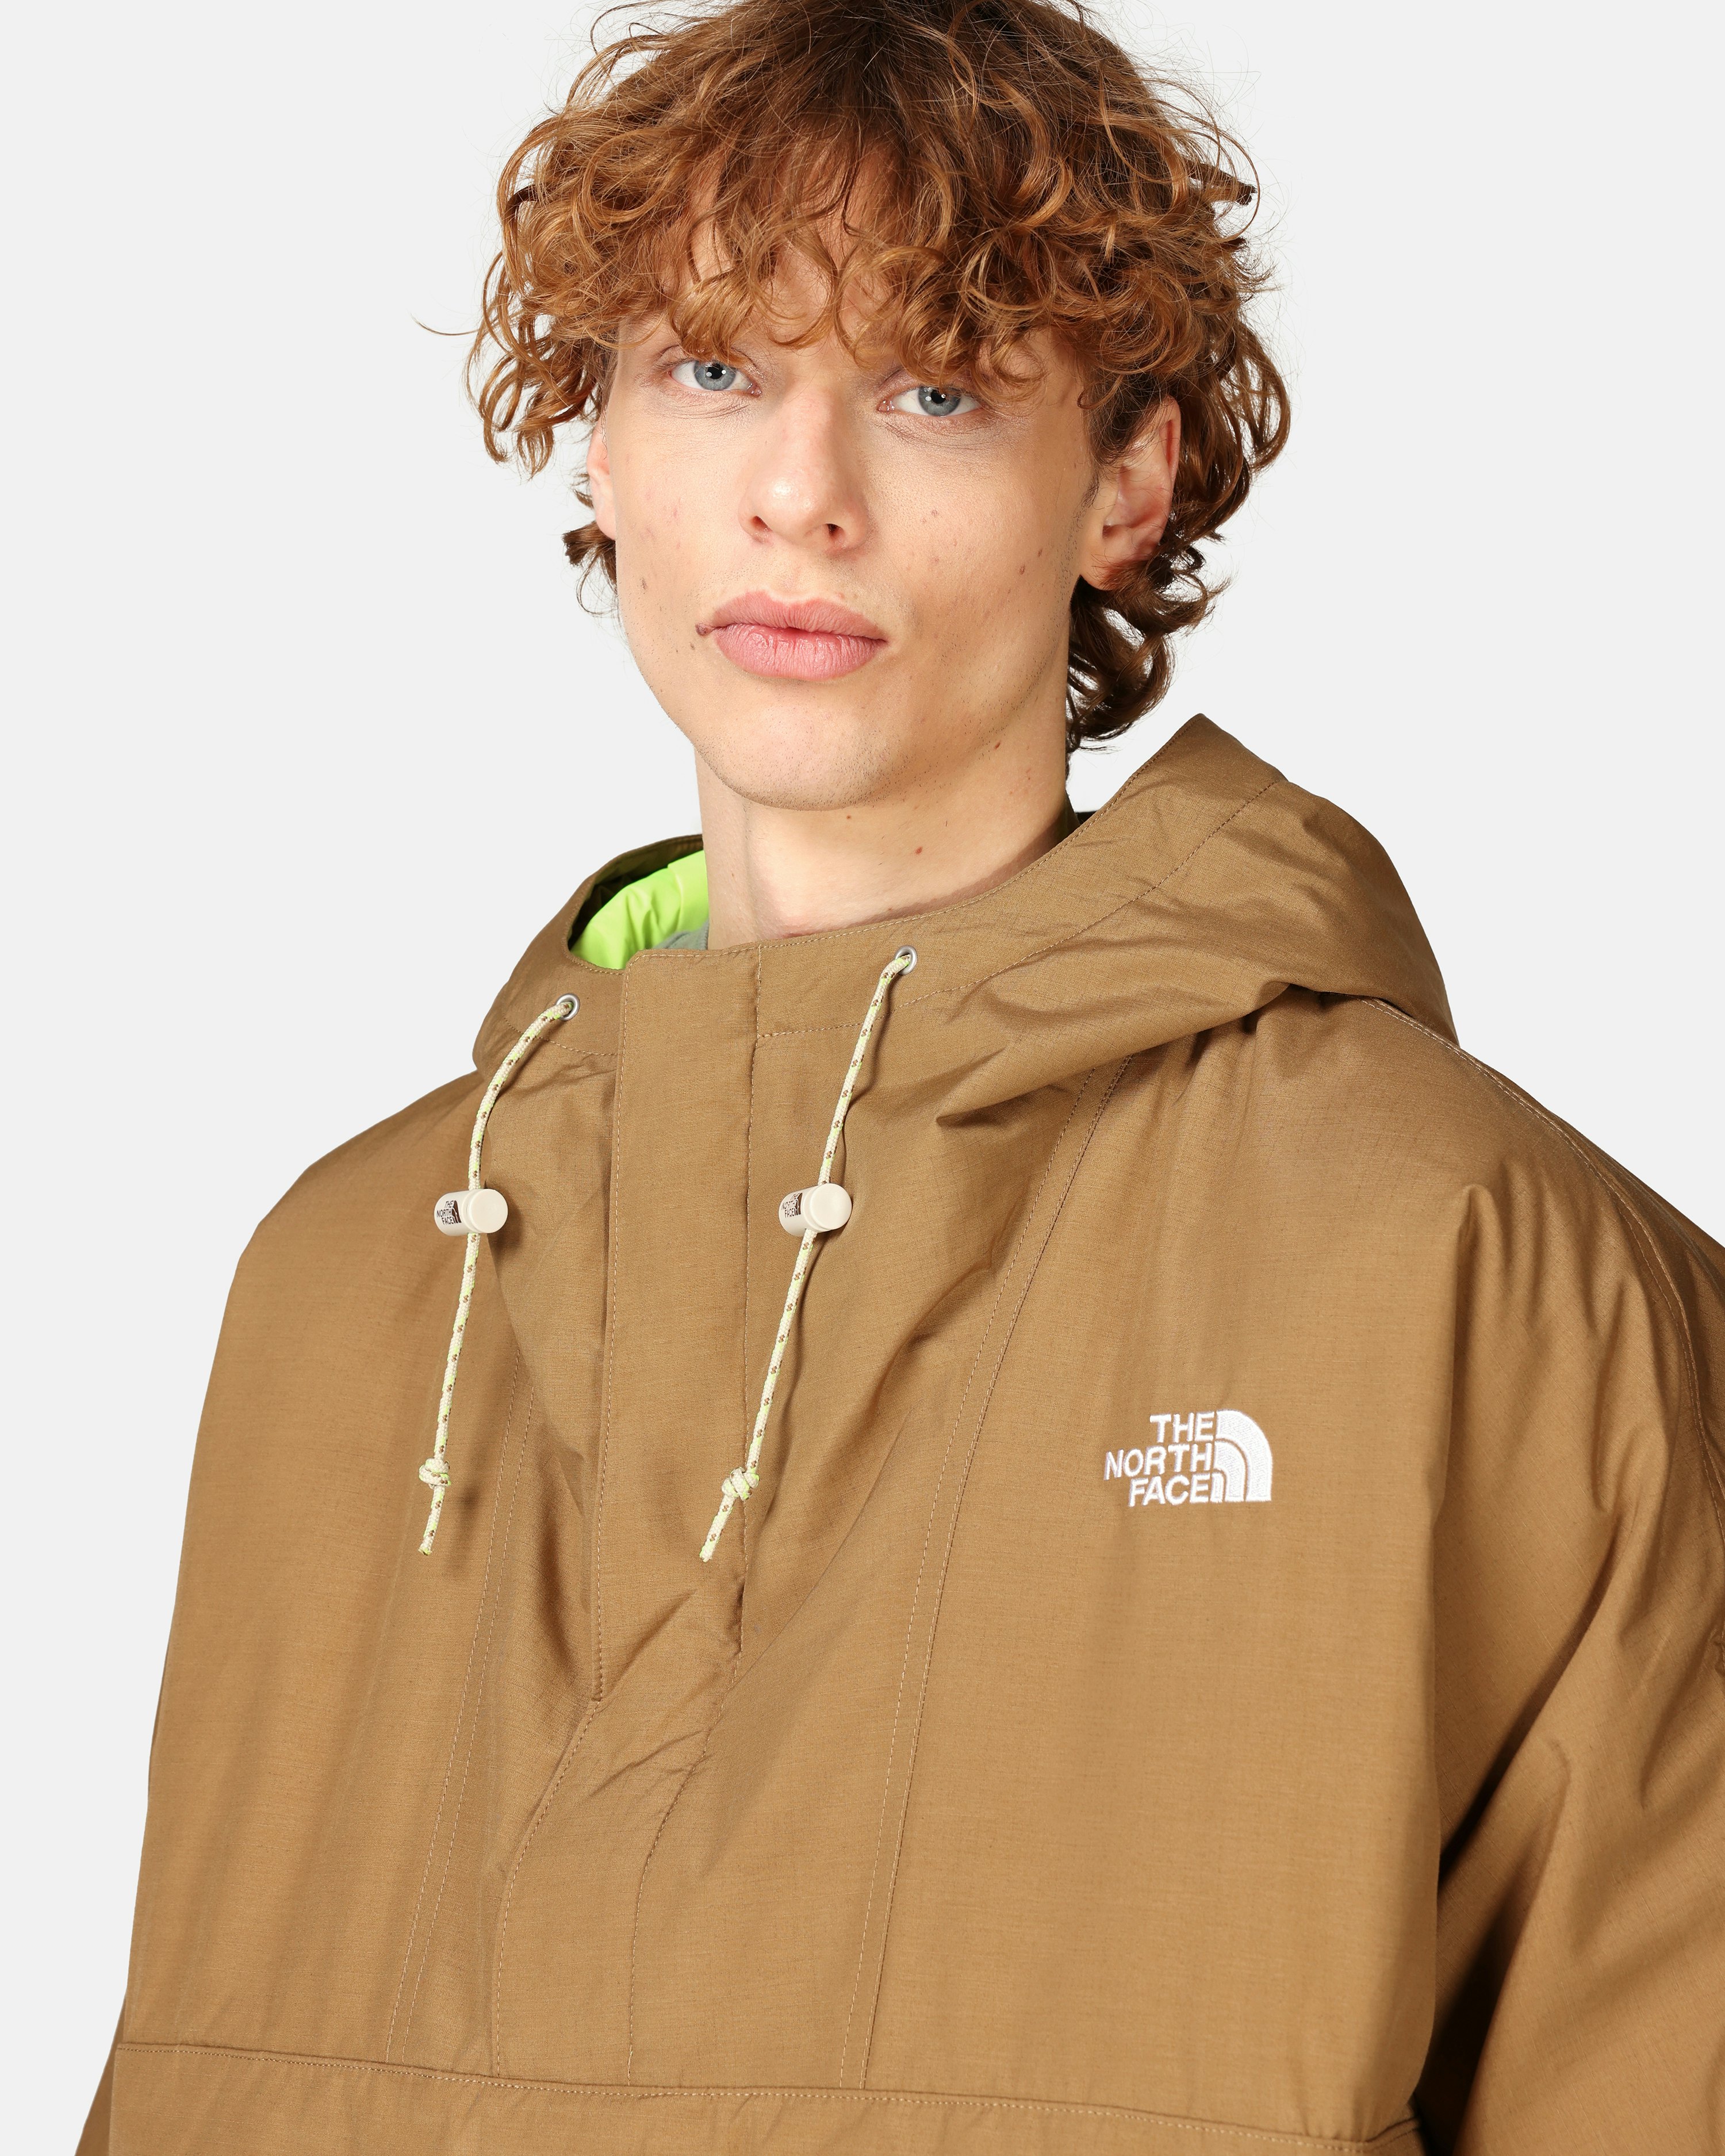 The North Face, Get the jackets at Junkyard